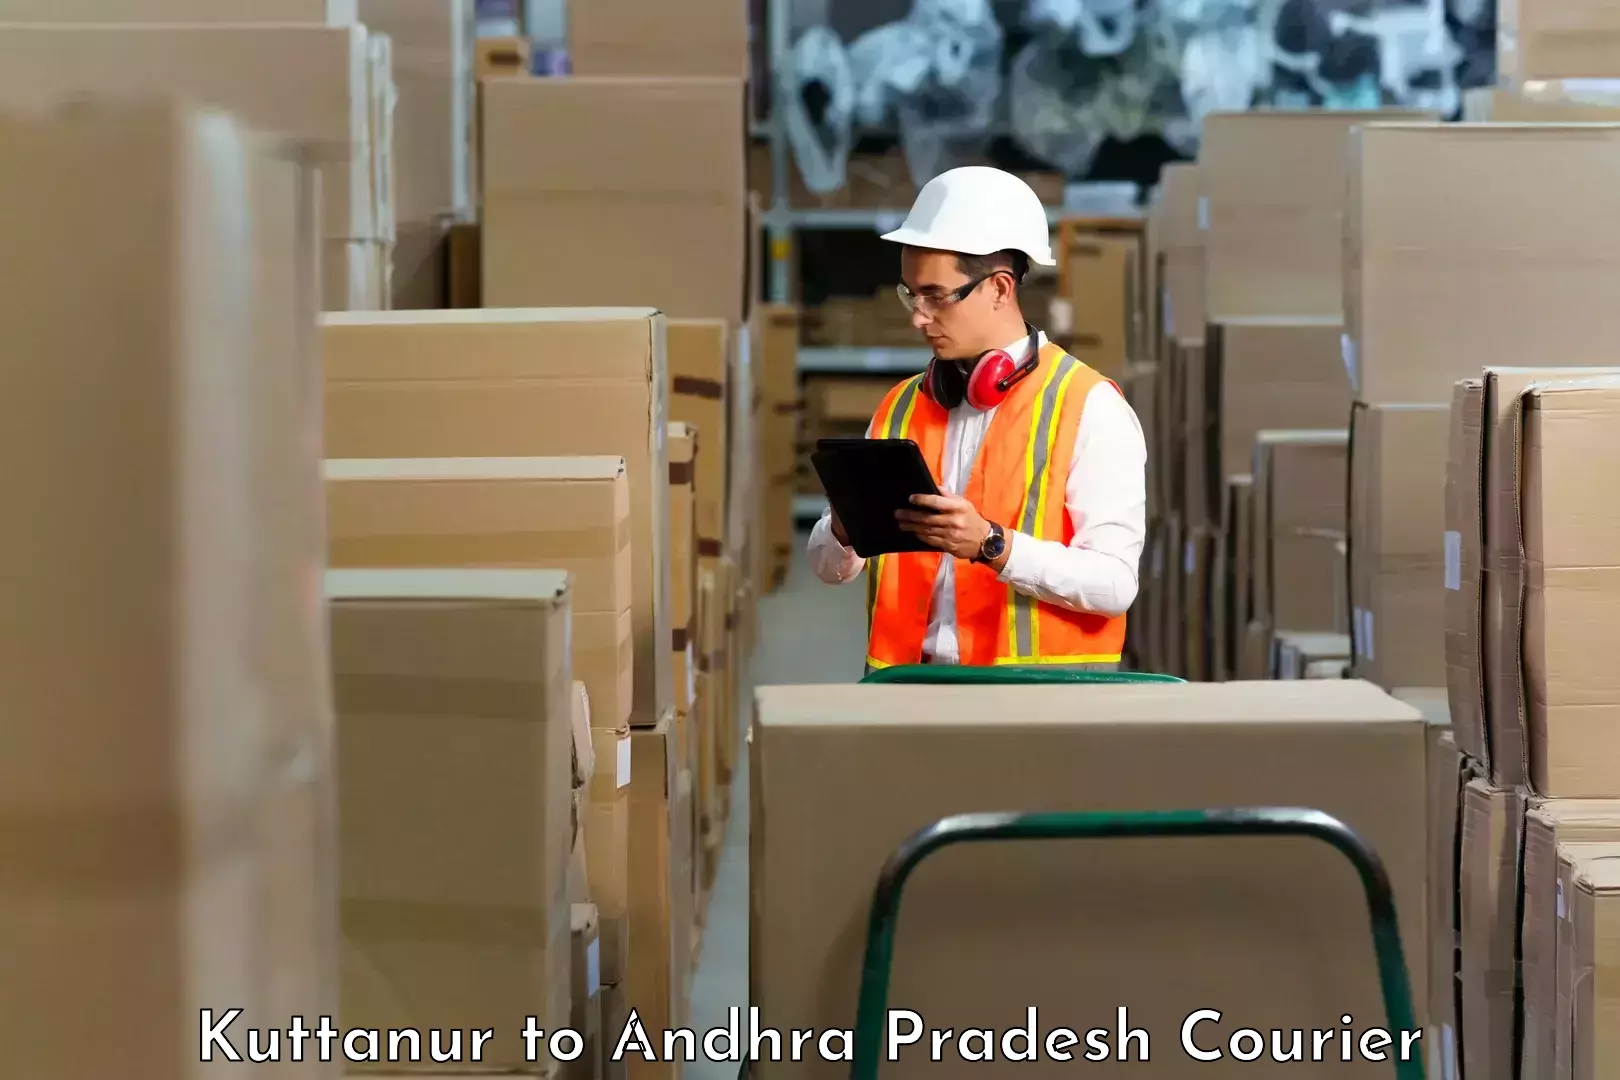 Courier service efficiency in Kuttanur to Anakapalli